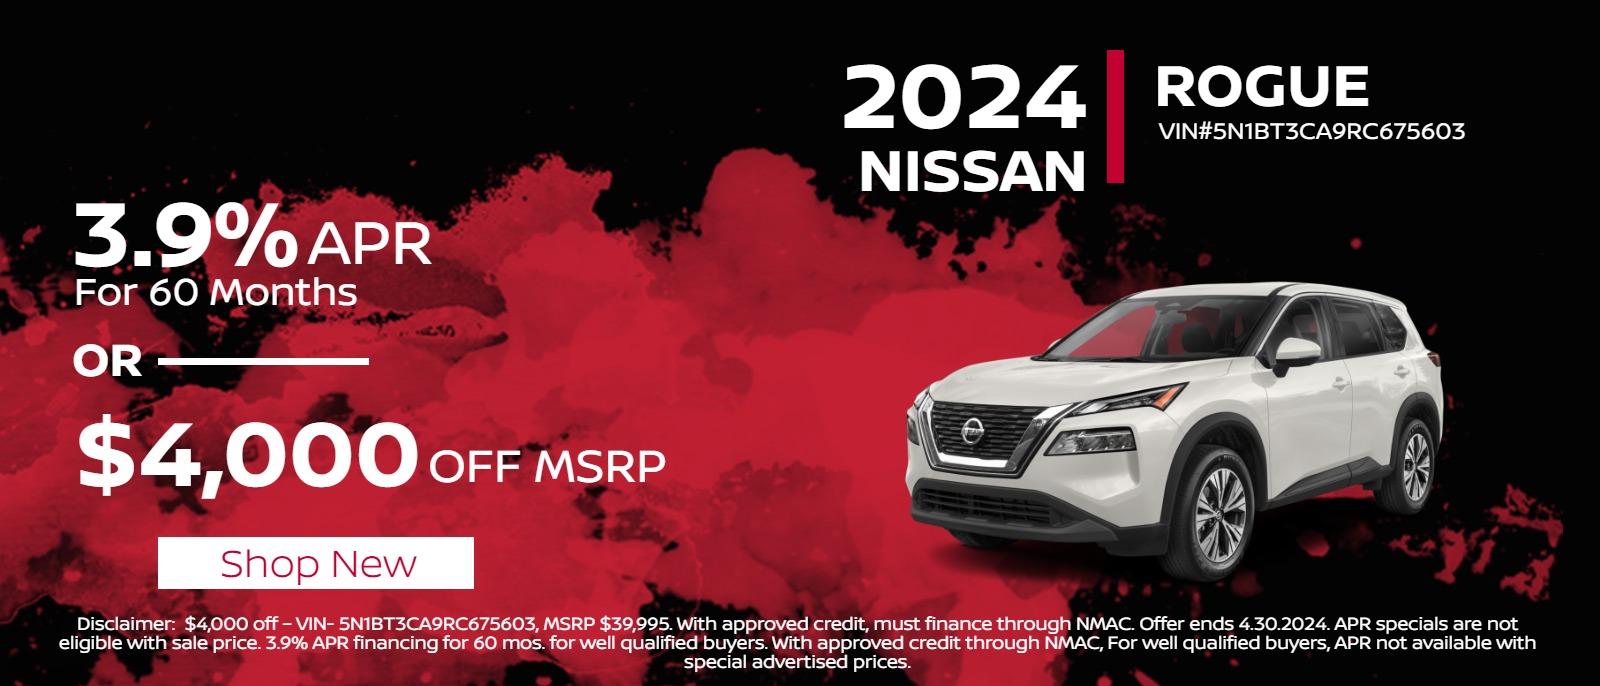 2024 Rogue 
3.9% APR for 60 months 
or
 $4,000 off MSRP